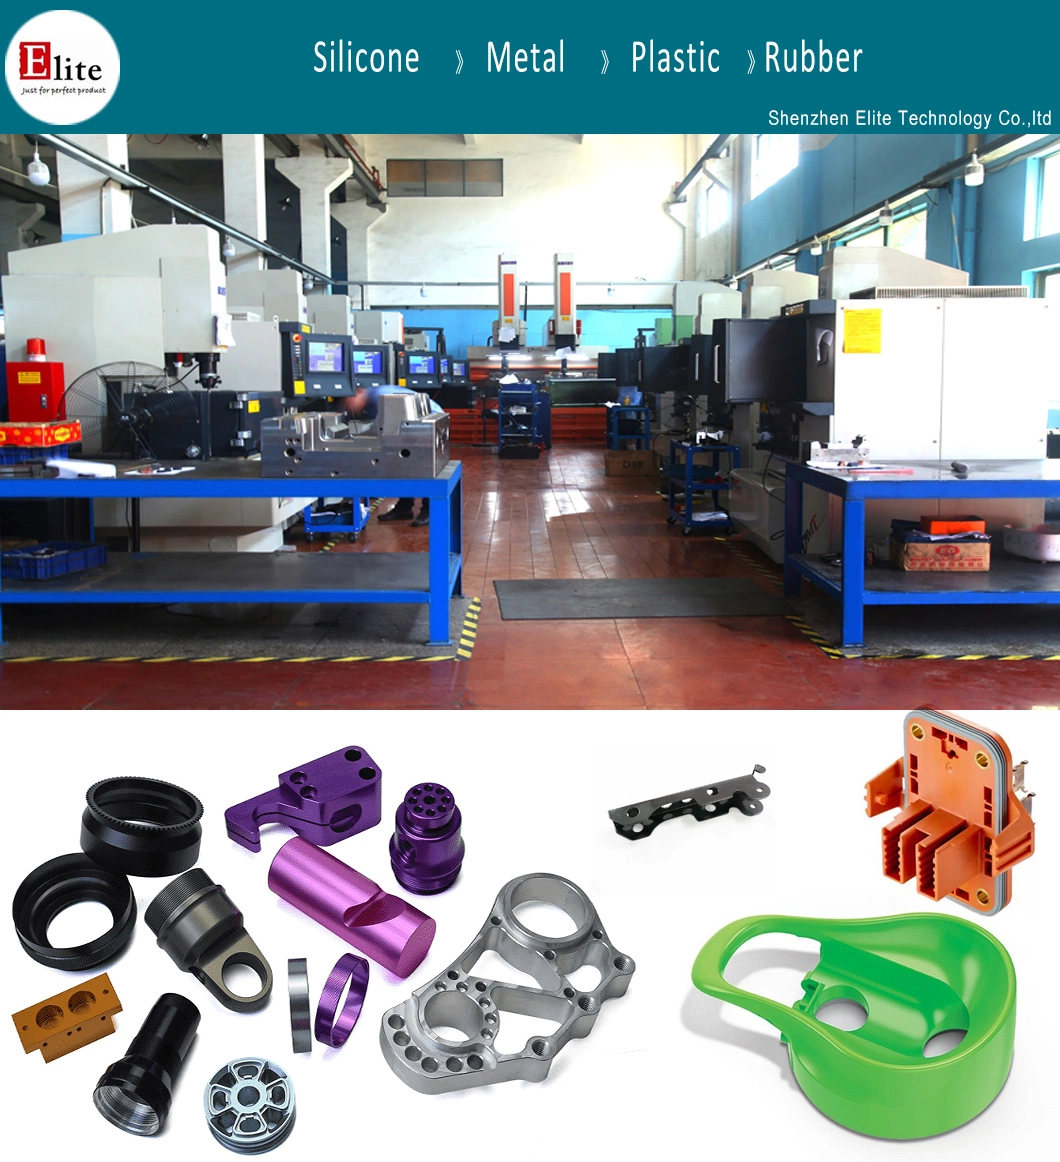 Optical Peek Plastic Molded Product Injection Mould and Molding Service